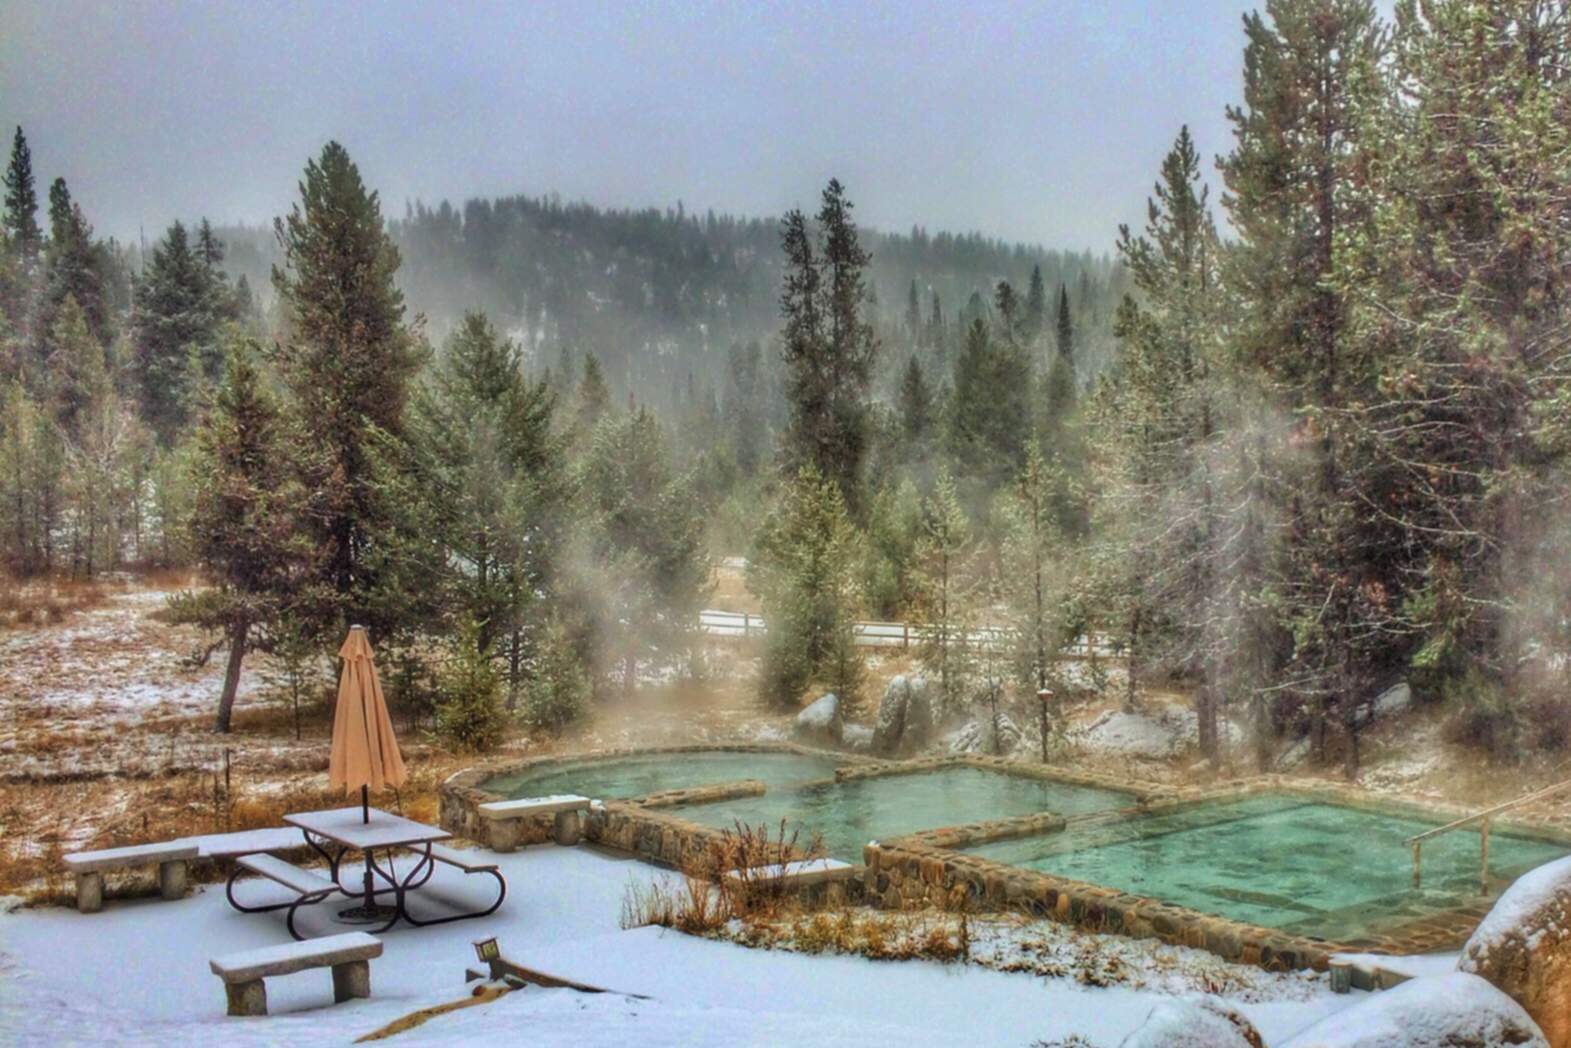 5 Hot Springs to Soak Your Troubles Away